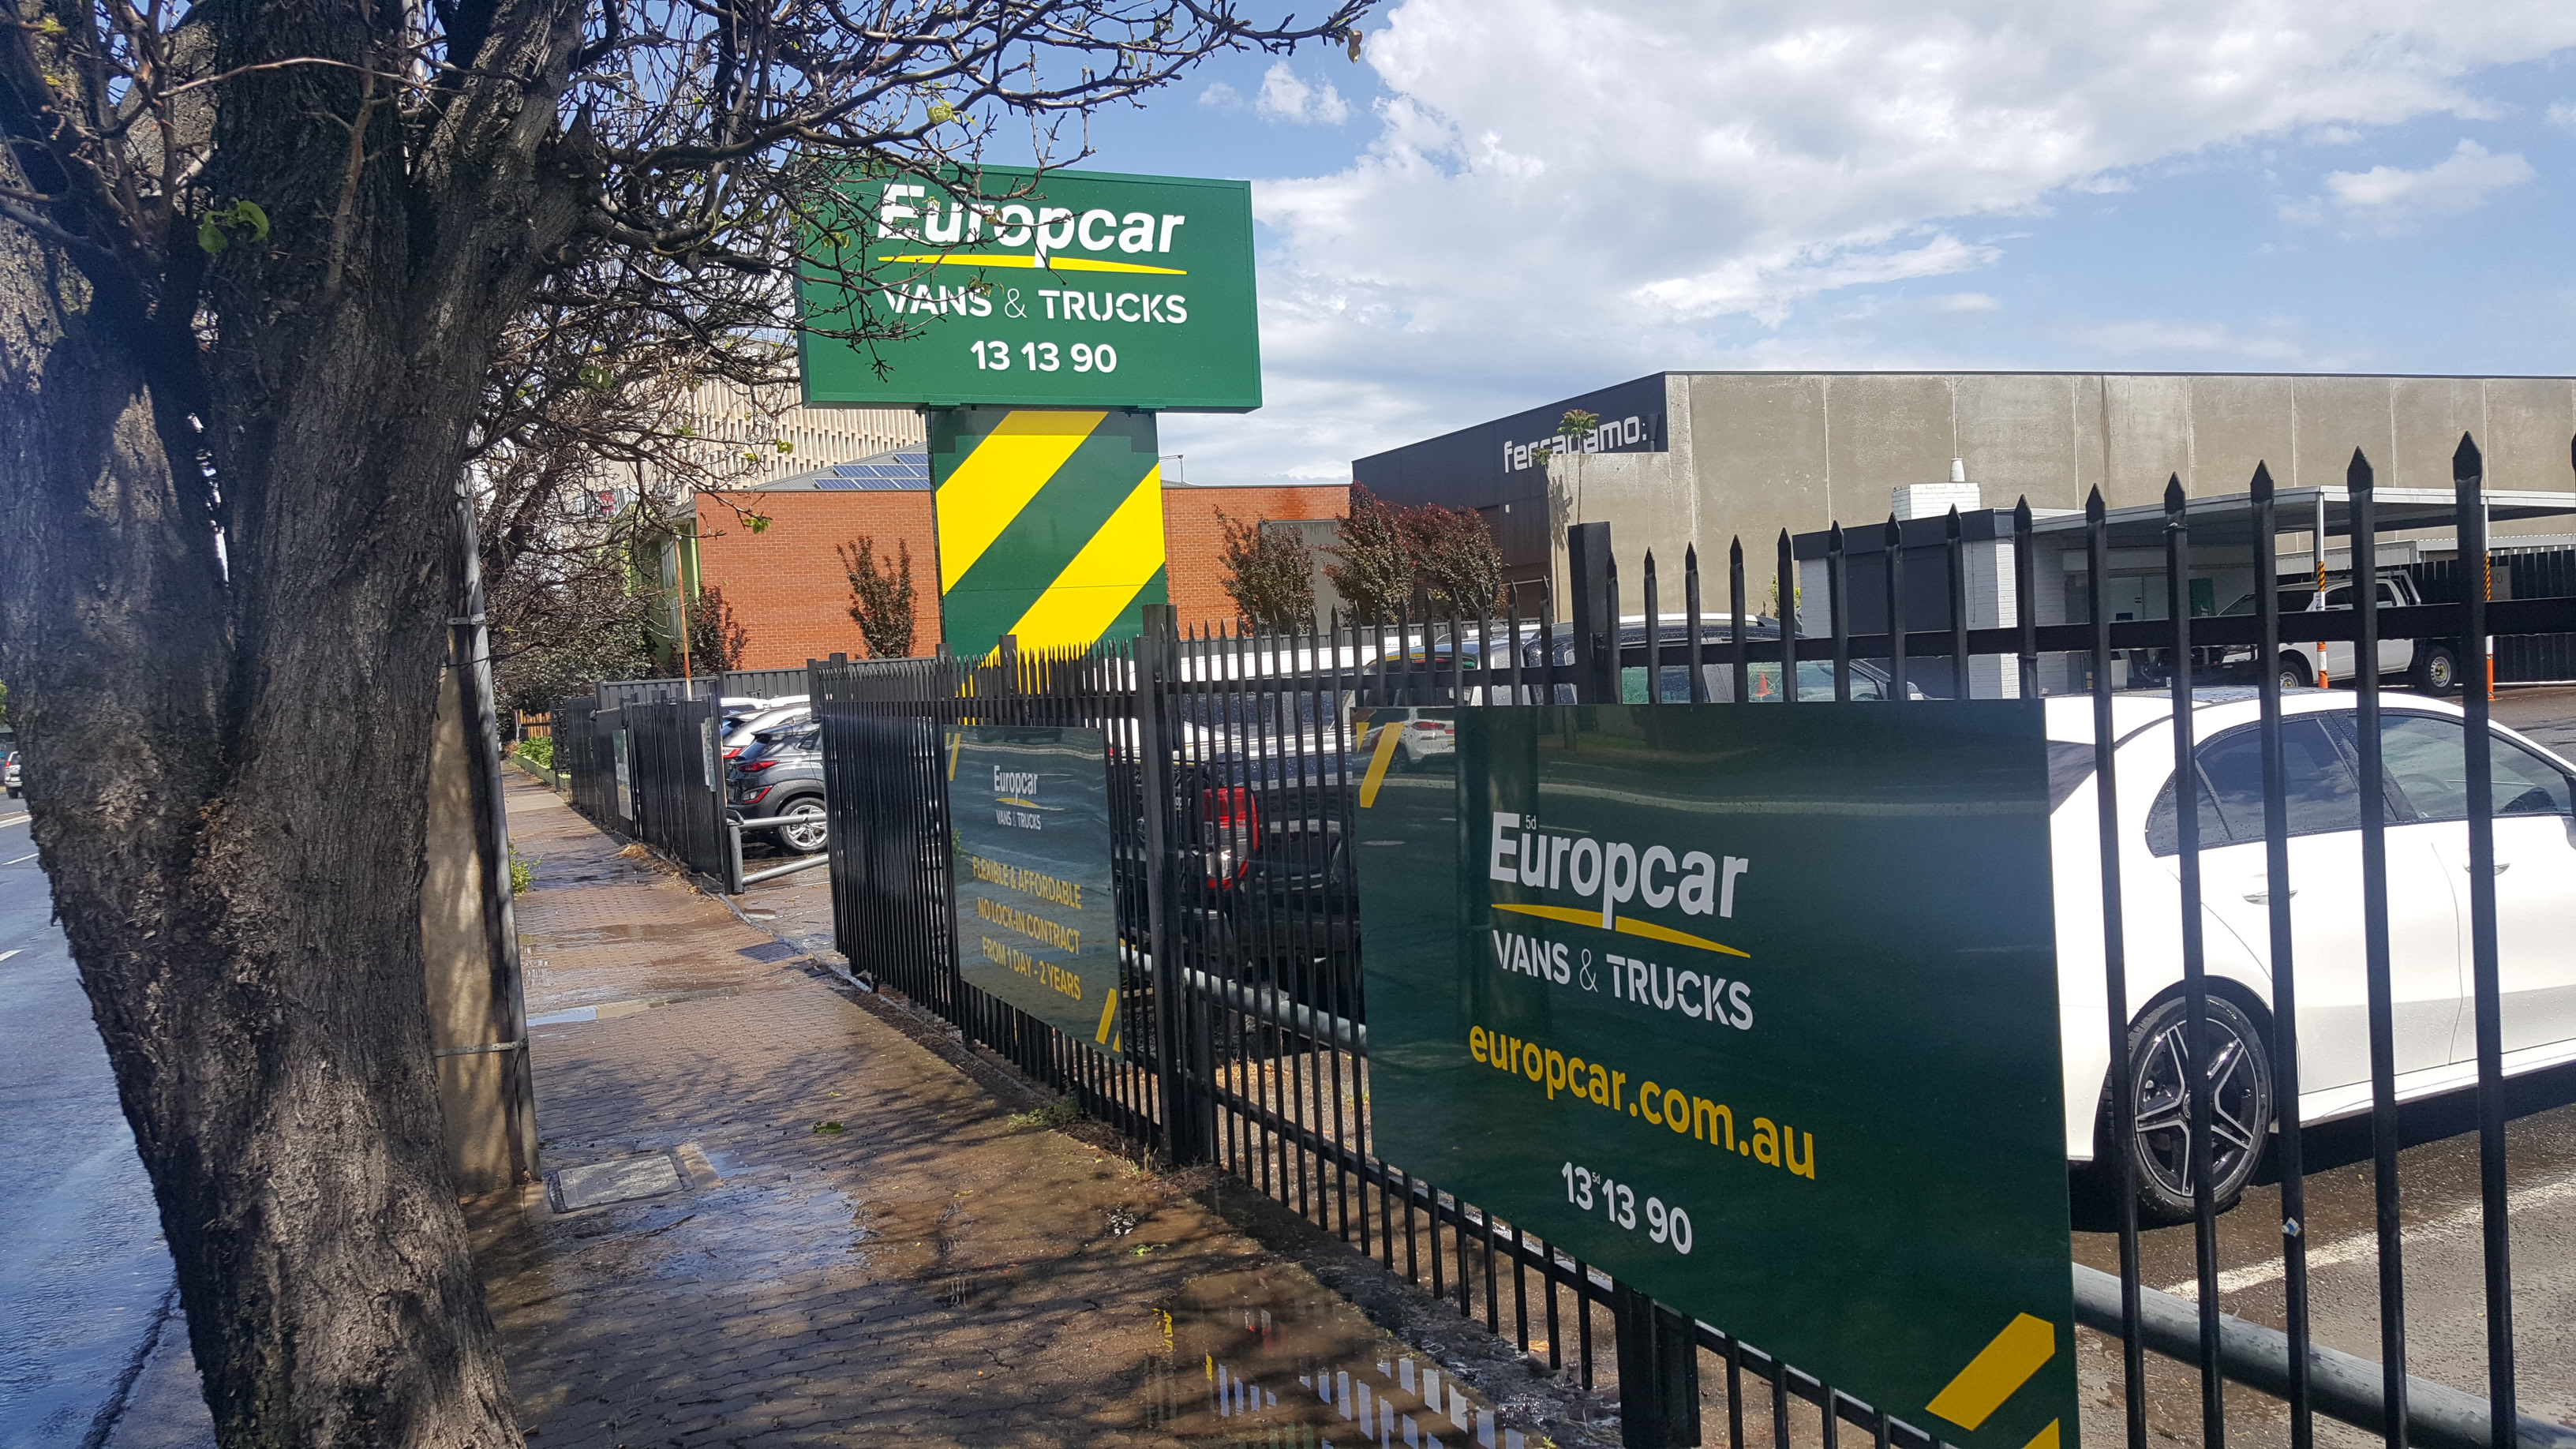 Featured image for “Europcar”